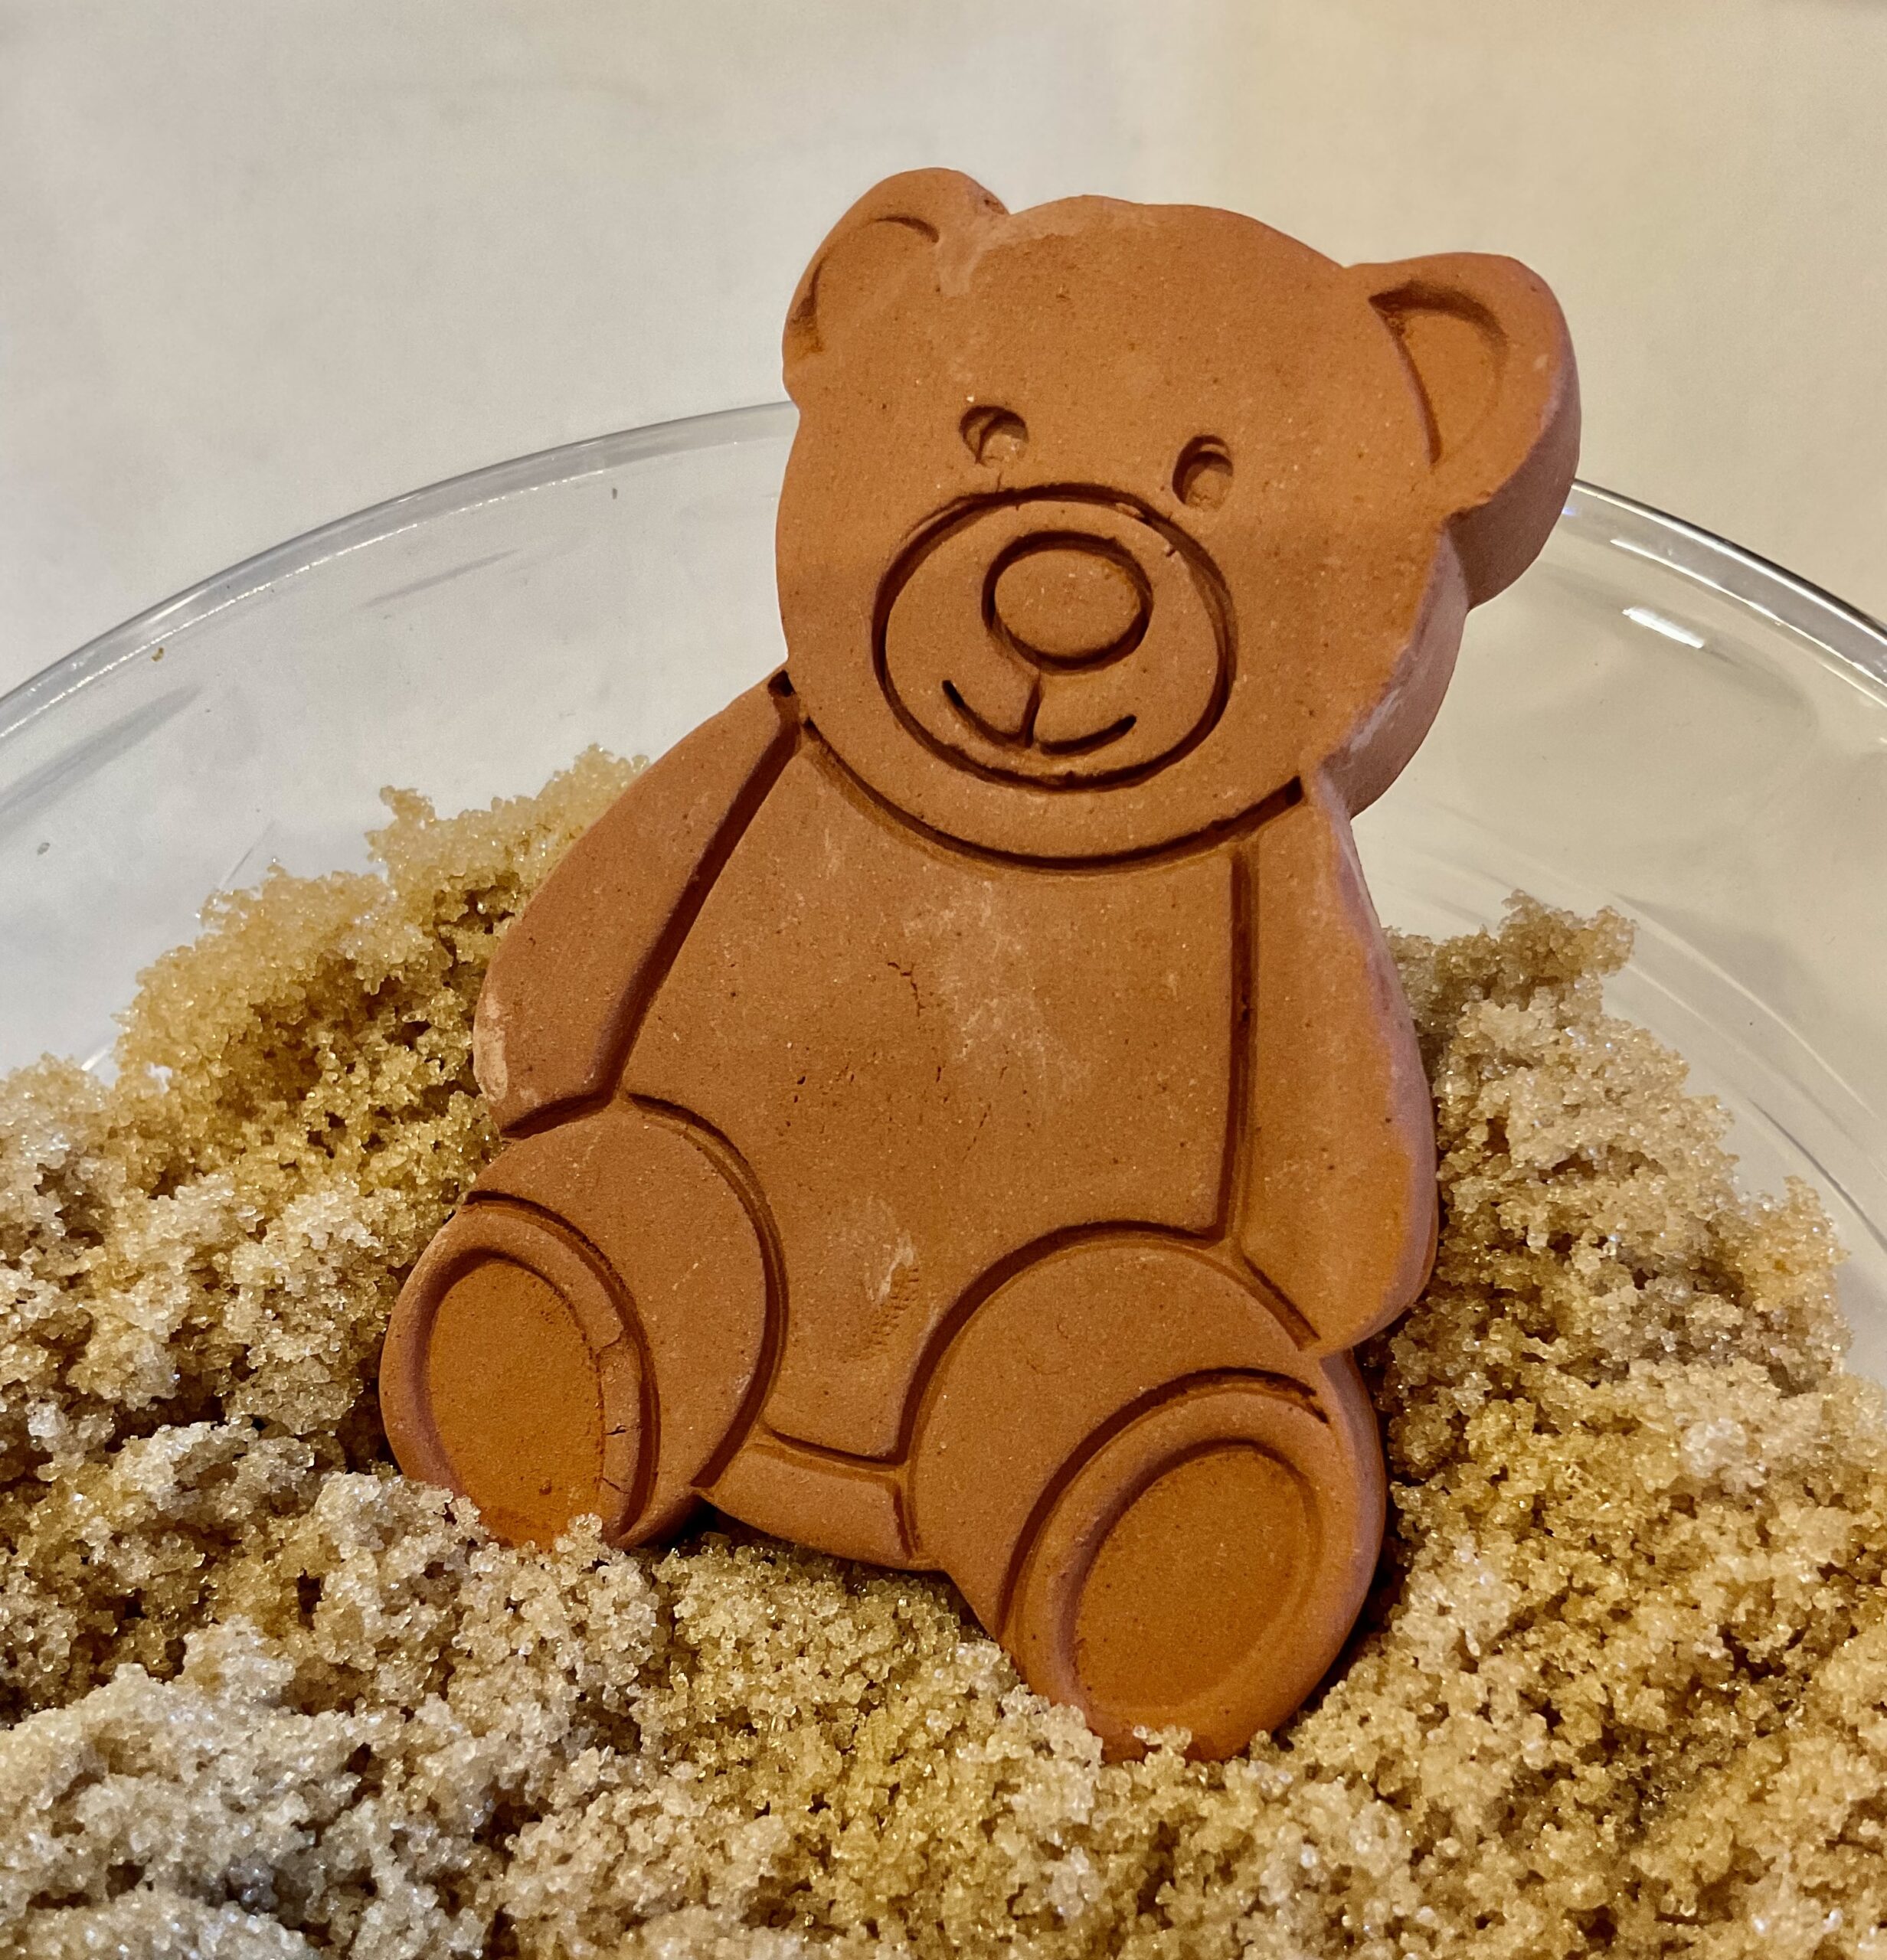 This Bear-Shaped Tool Keeps Brown Sugar Soft for Up to 6 Months